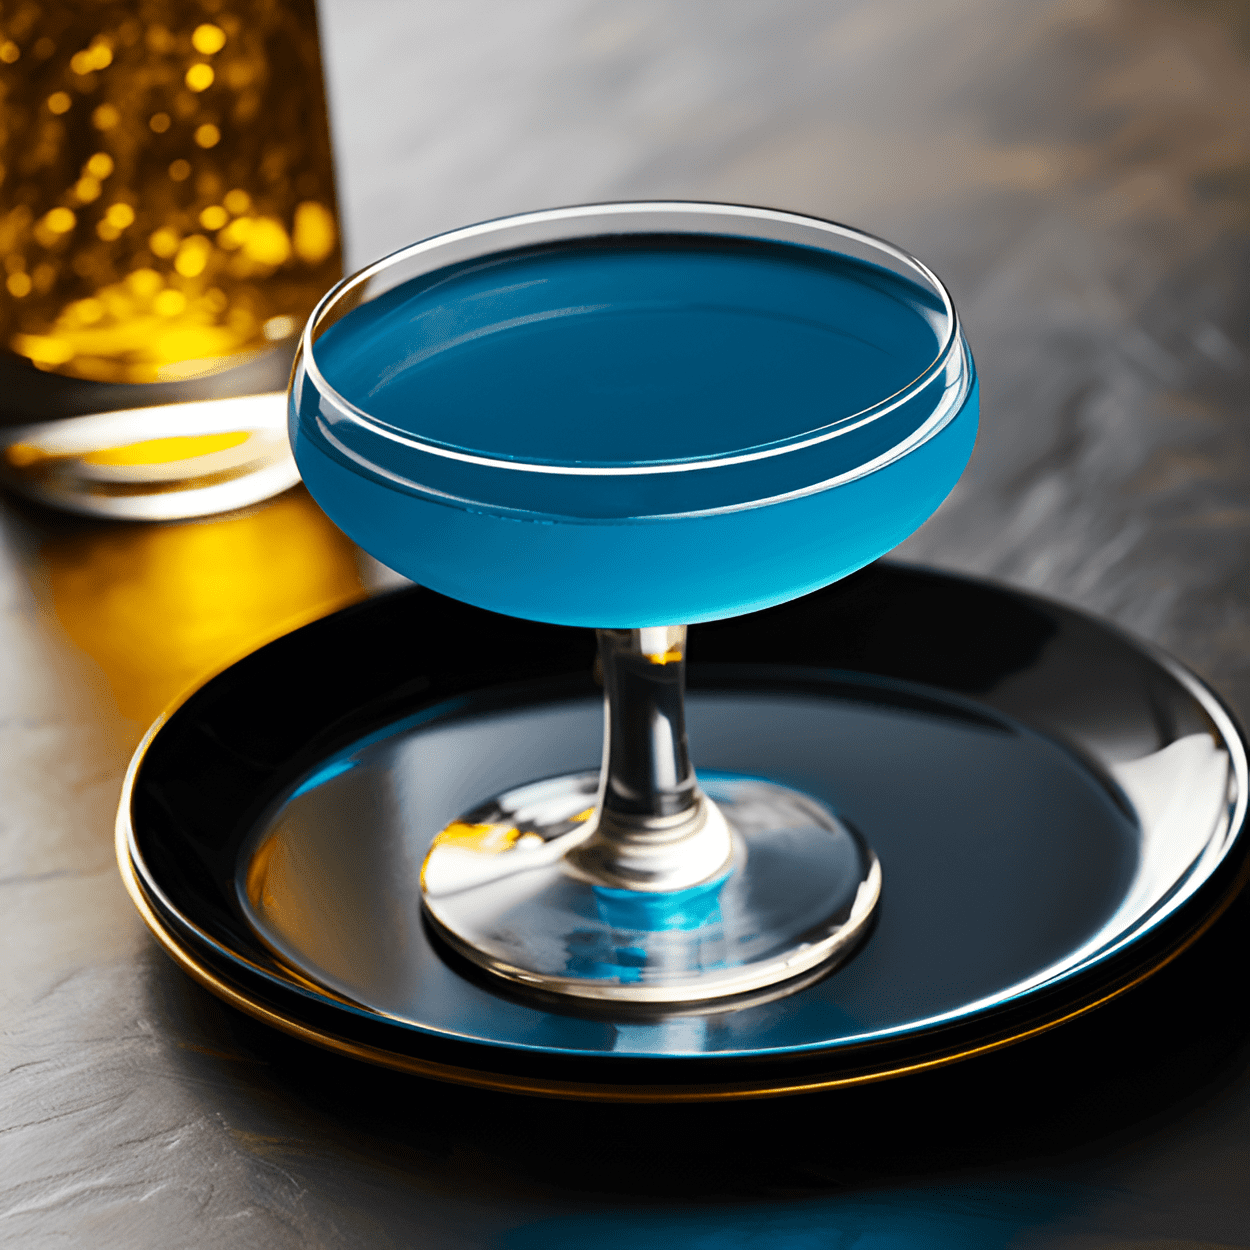 Beam Me Up Scotty Cocktail Recipe - The Beam Me Up Scotty cocktail is a delightful mix of sweet and sour. The peach schnapps and blue curacao give it a fruity sweetness, while the vodka adds a bit of a kick. The sour mix balances out the sweetness, resulting in a tangy, refreshing drink.